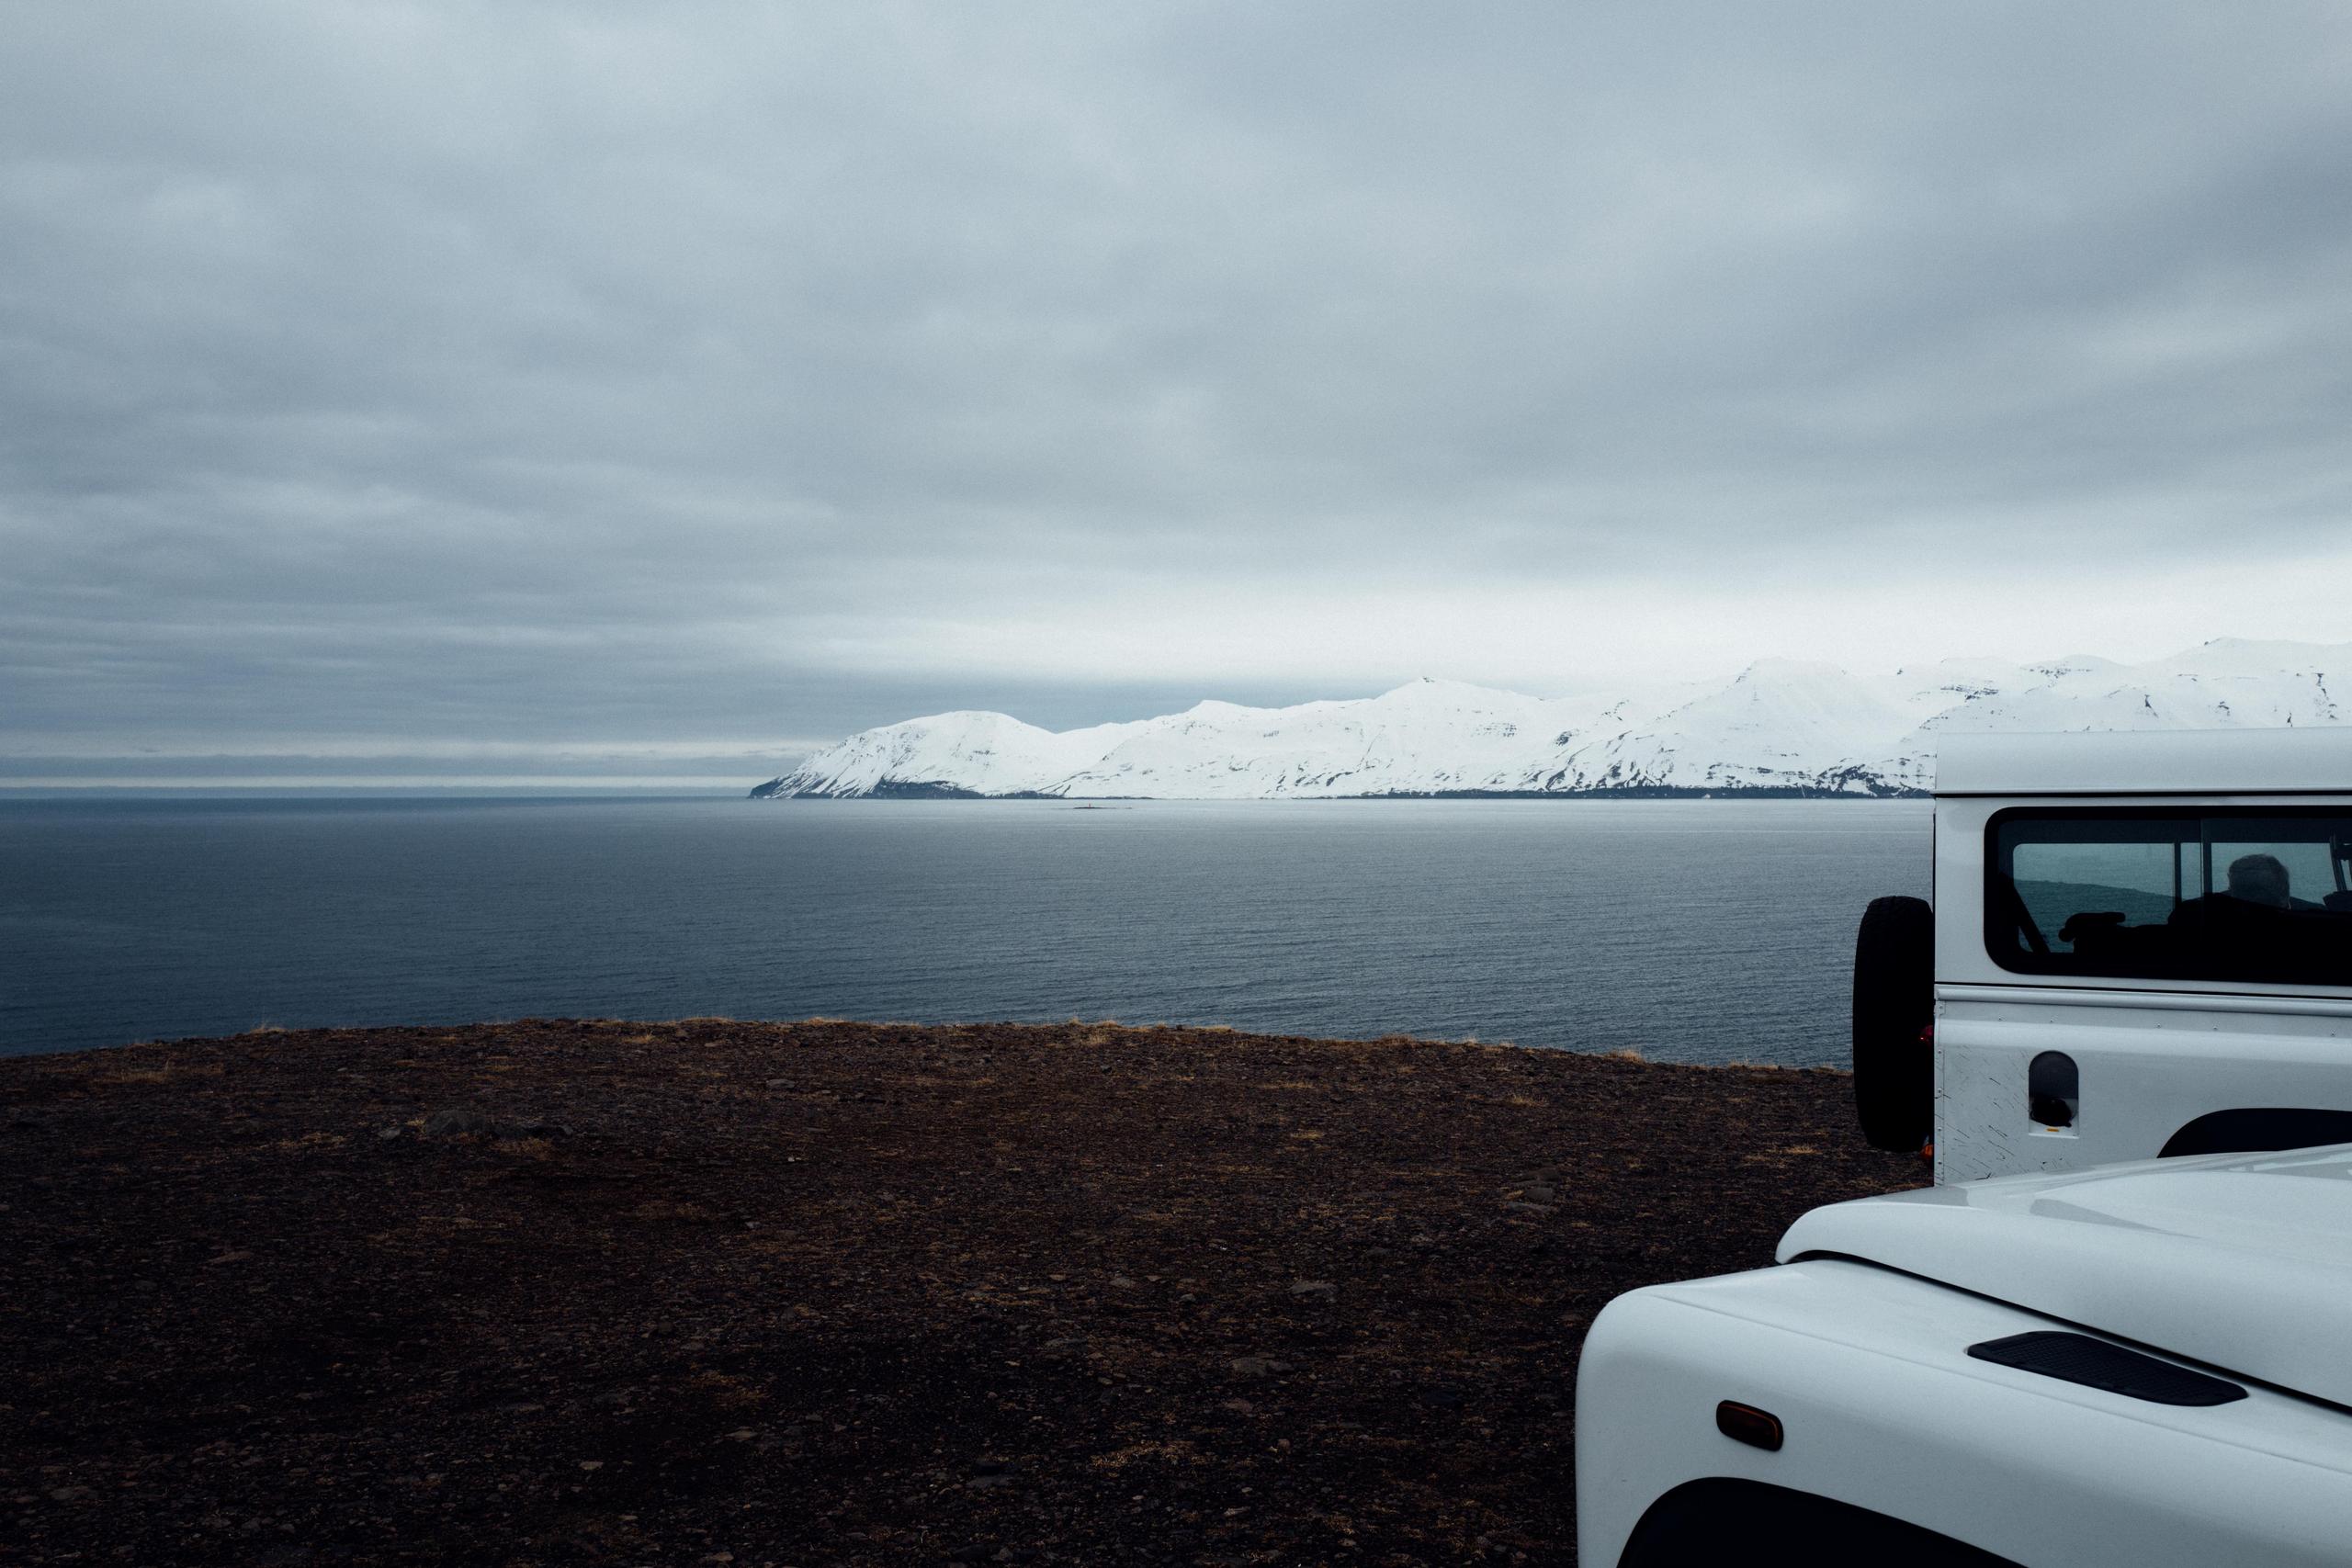 Two white Land Rovers in foreground and Iceland seascape in the background